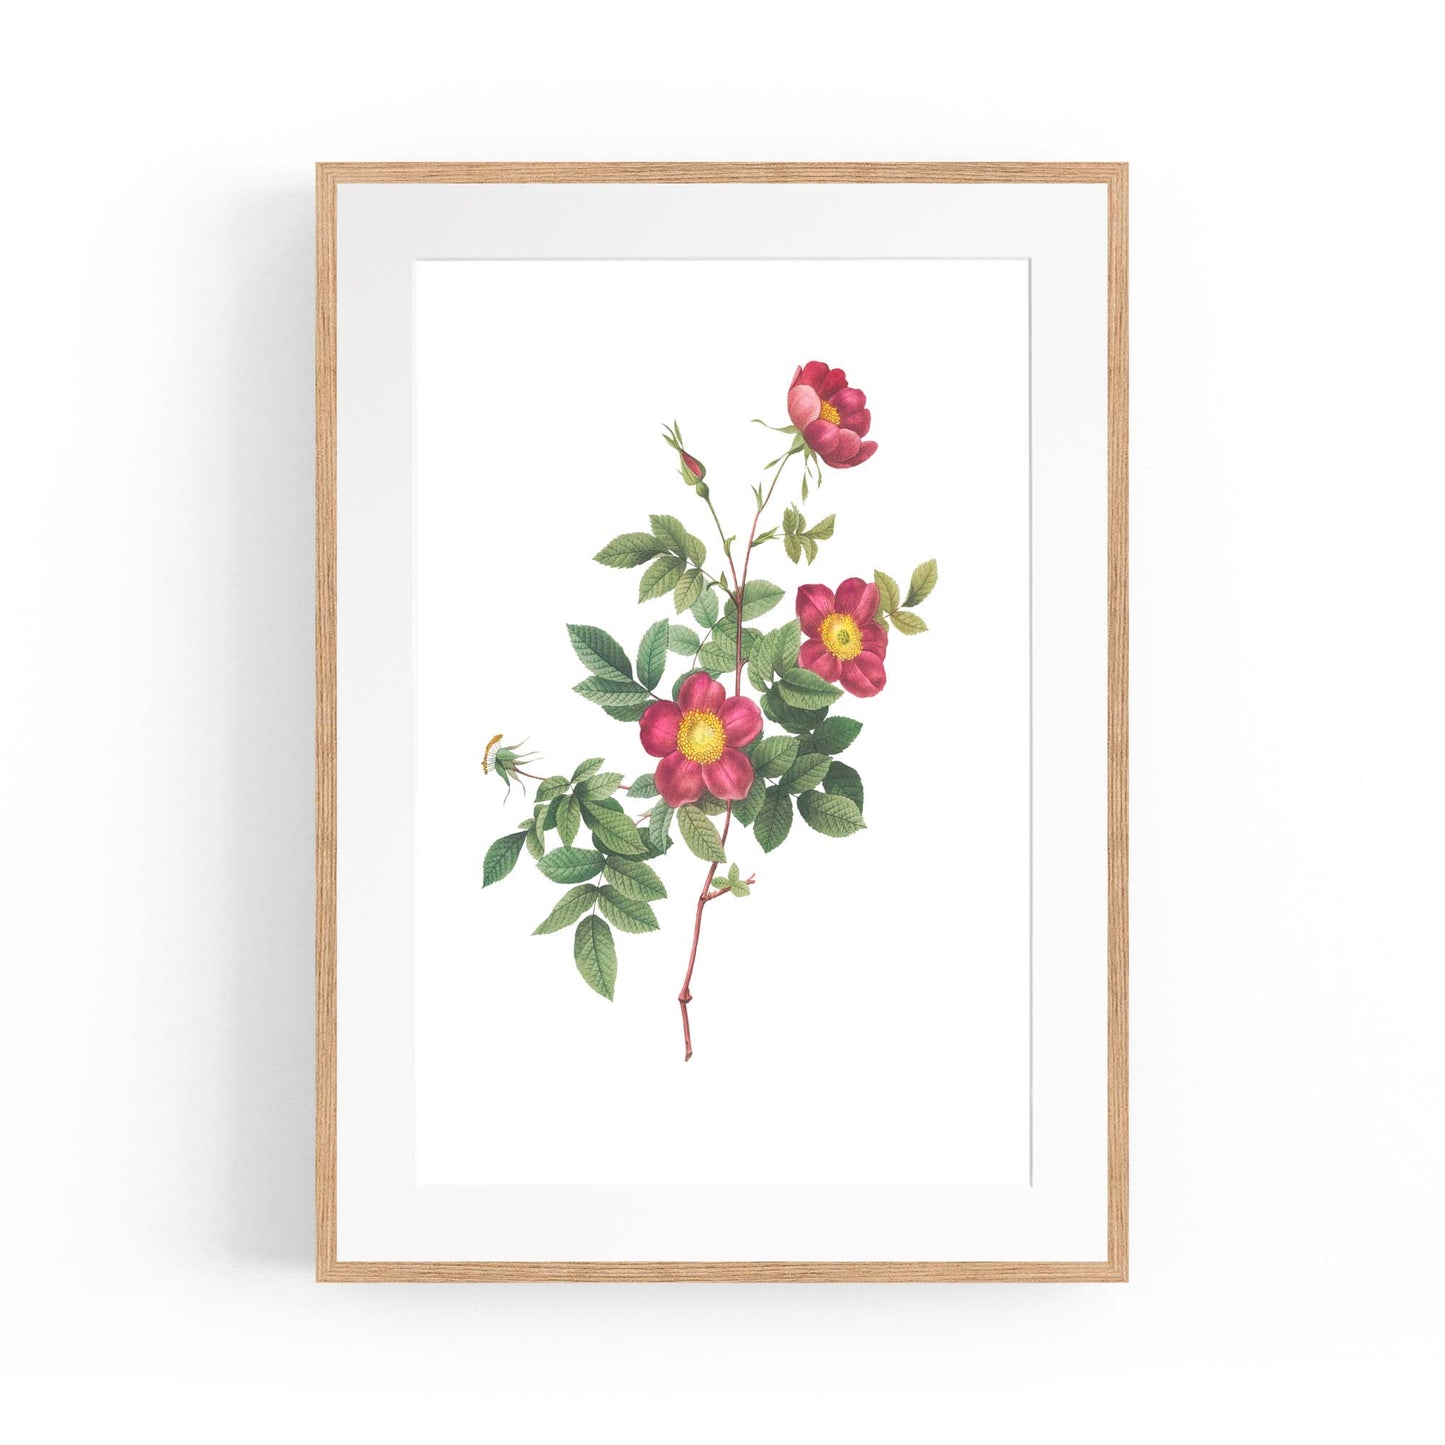 Flower Botanical Painting Kitchen Hallway Wall Art #7 - The Affordable Art Company